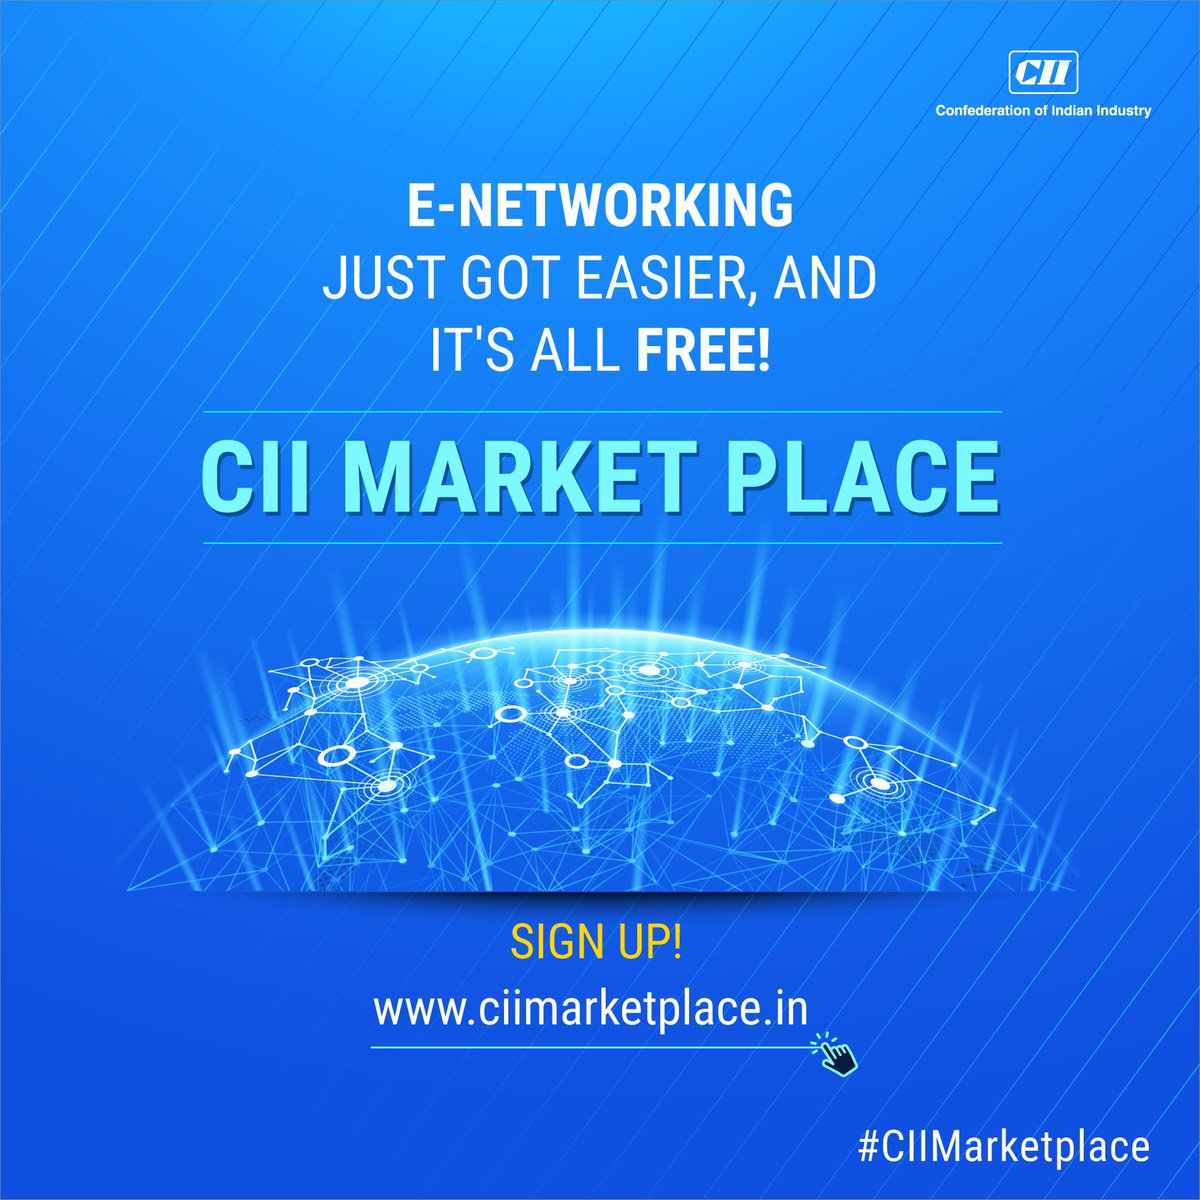 Expand your business horizons with free e-networking on #CIIMarketPlace. Find suppliers, build lasting relationships, and witness your business soar to new heights. 

Sign up today! 🌐 ciimarketplace.in

#MyCII #GlobalBusiness